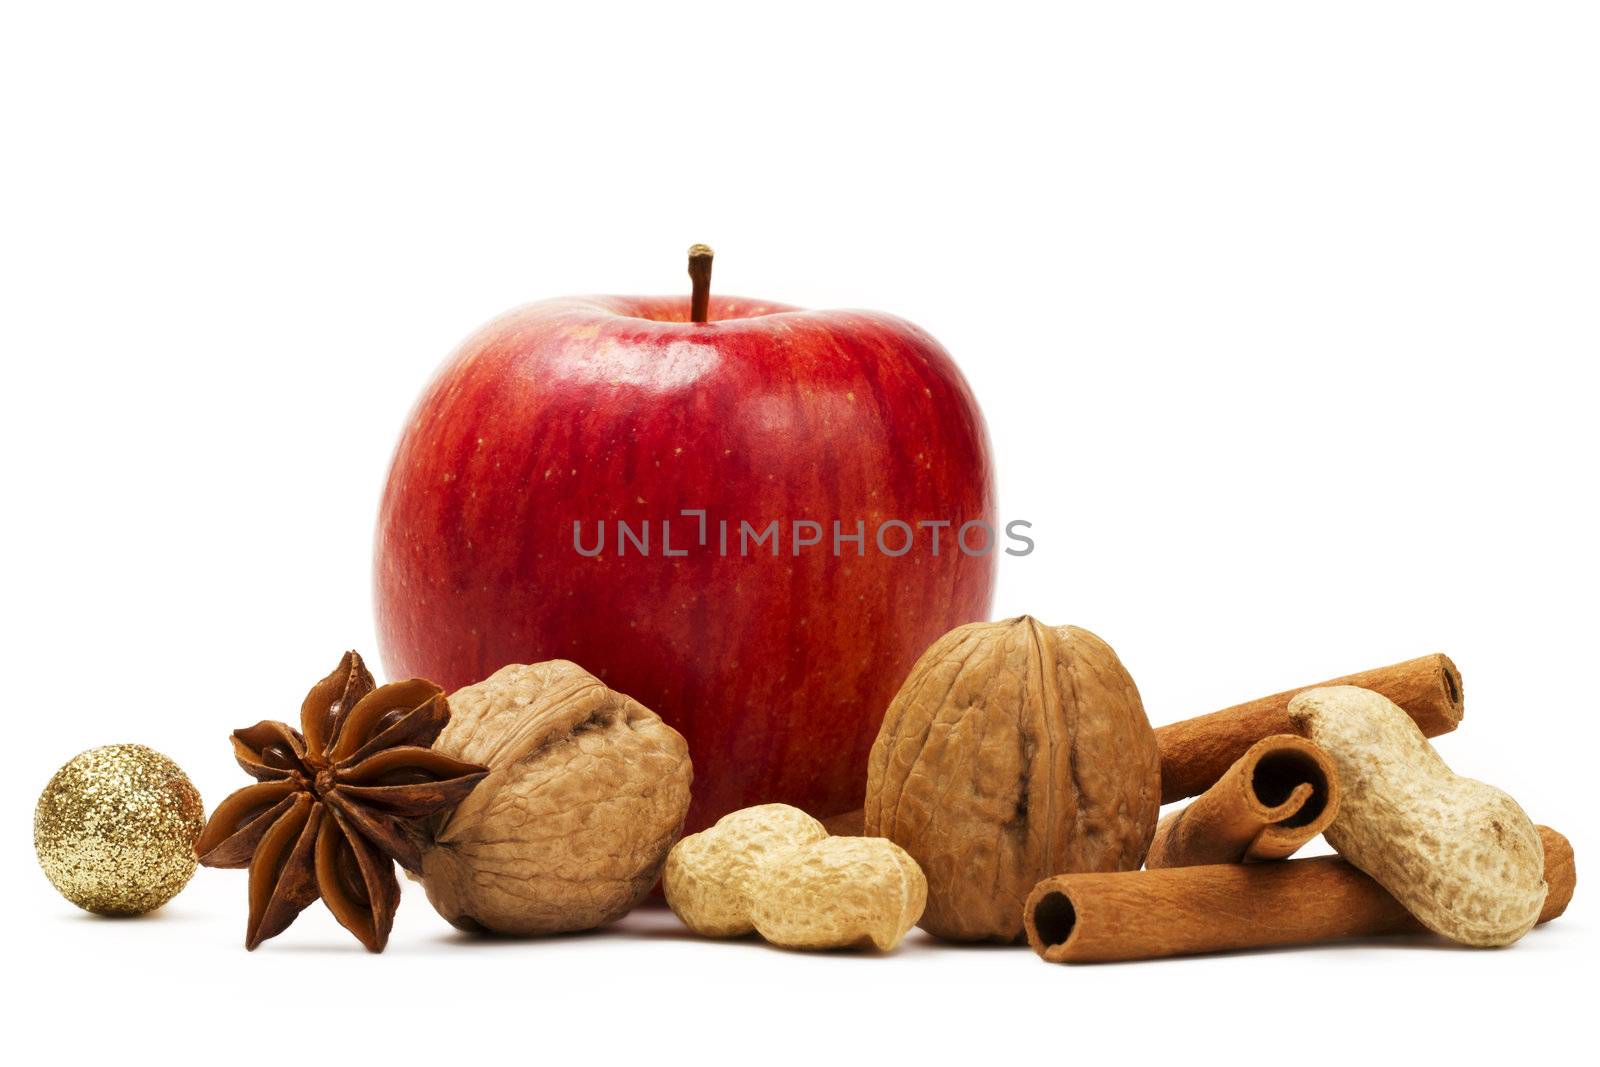 red apple, star anise, cinnamon sticks and some nuts  on white background